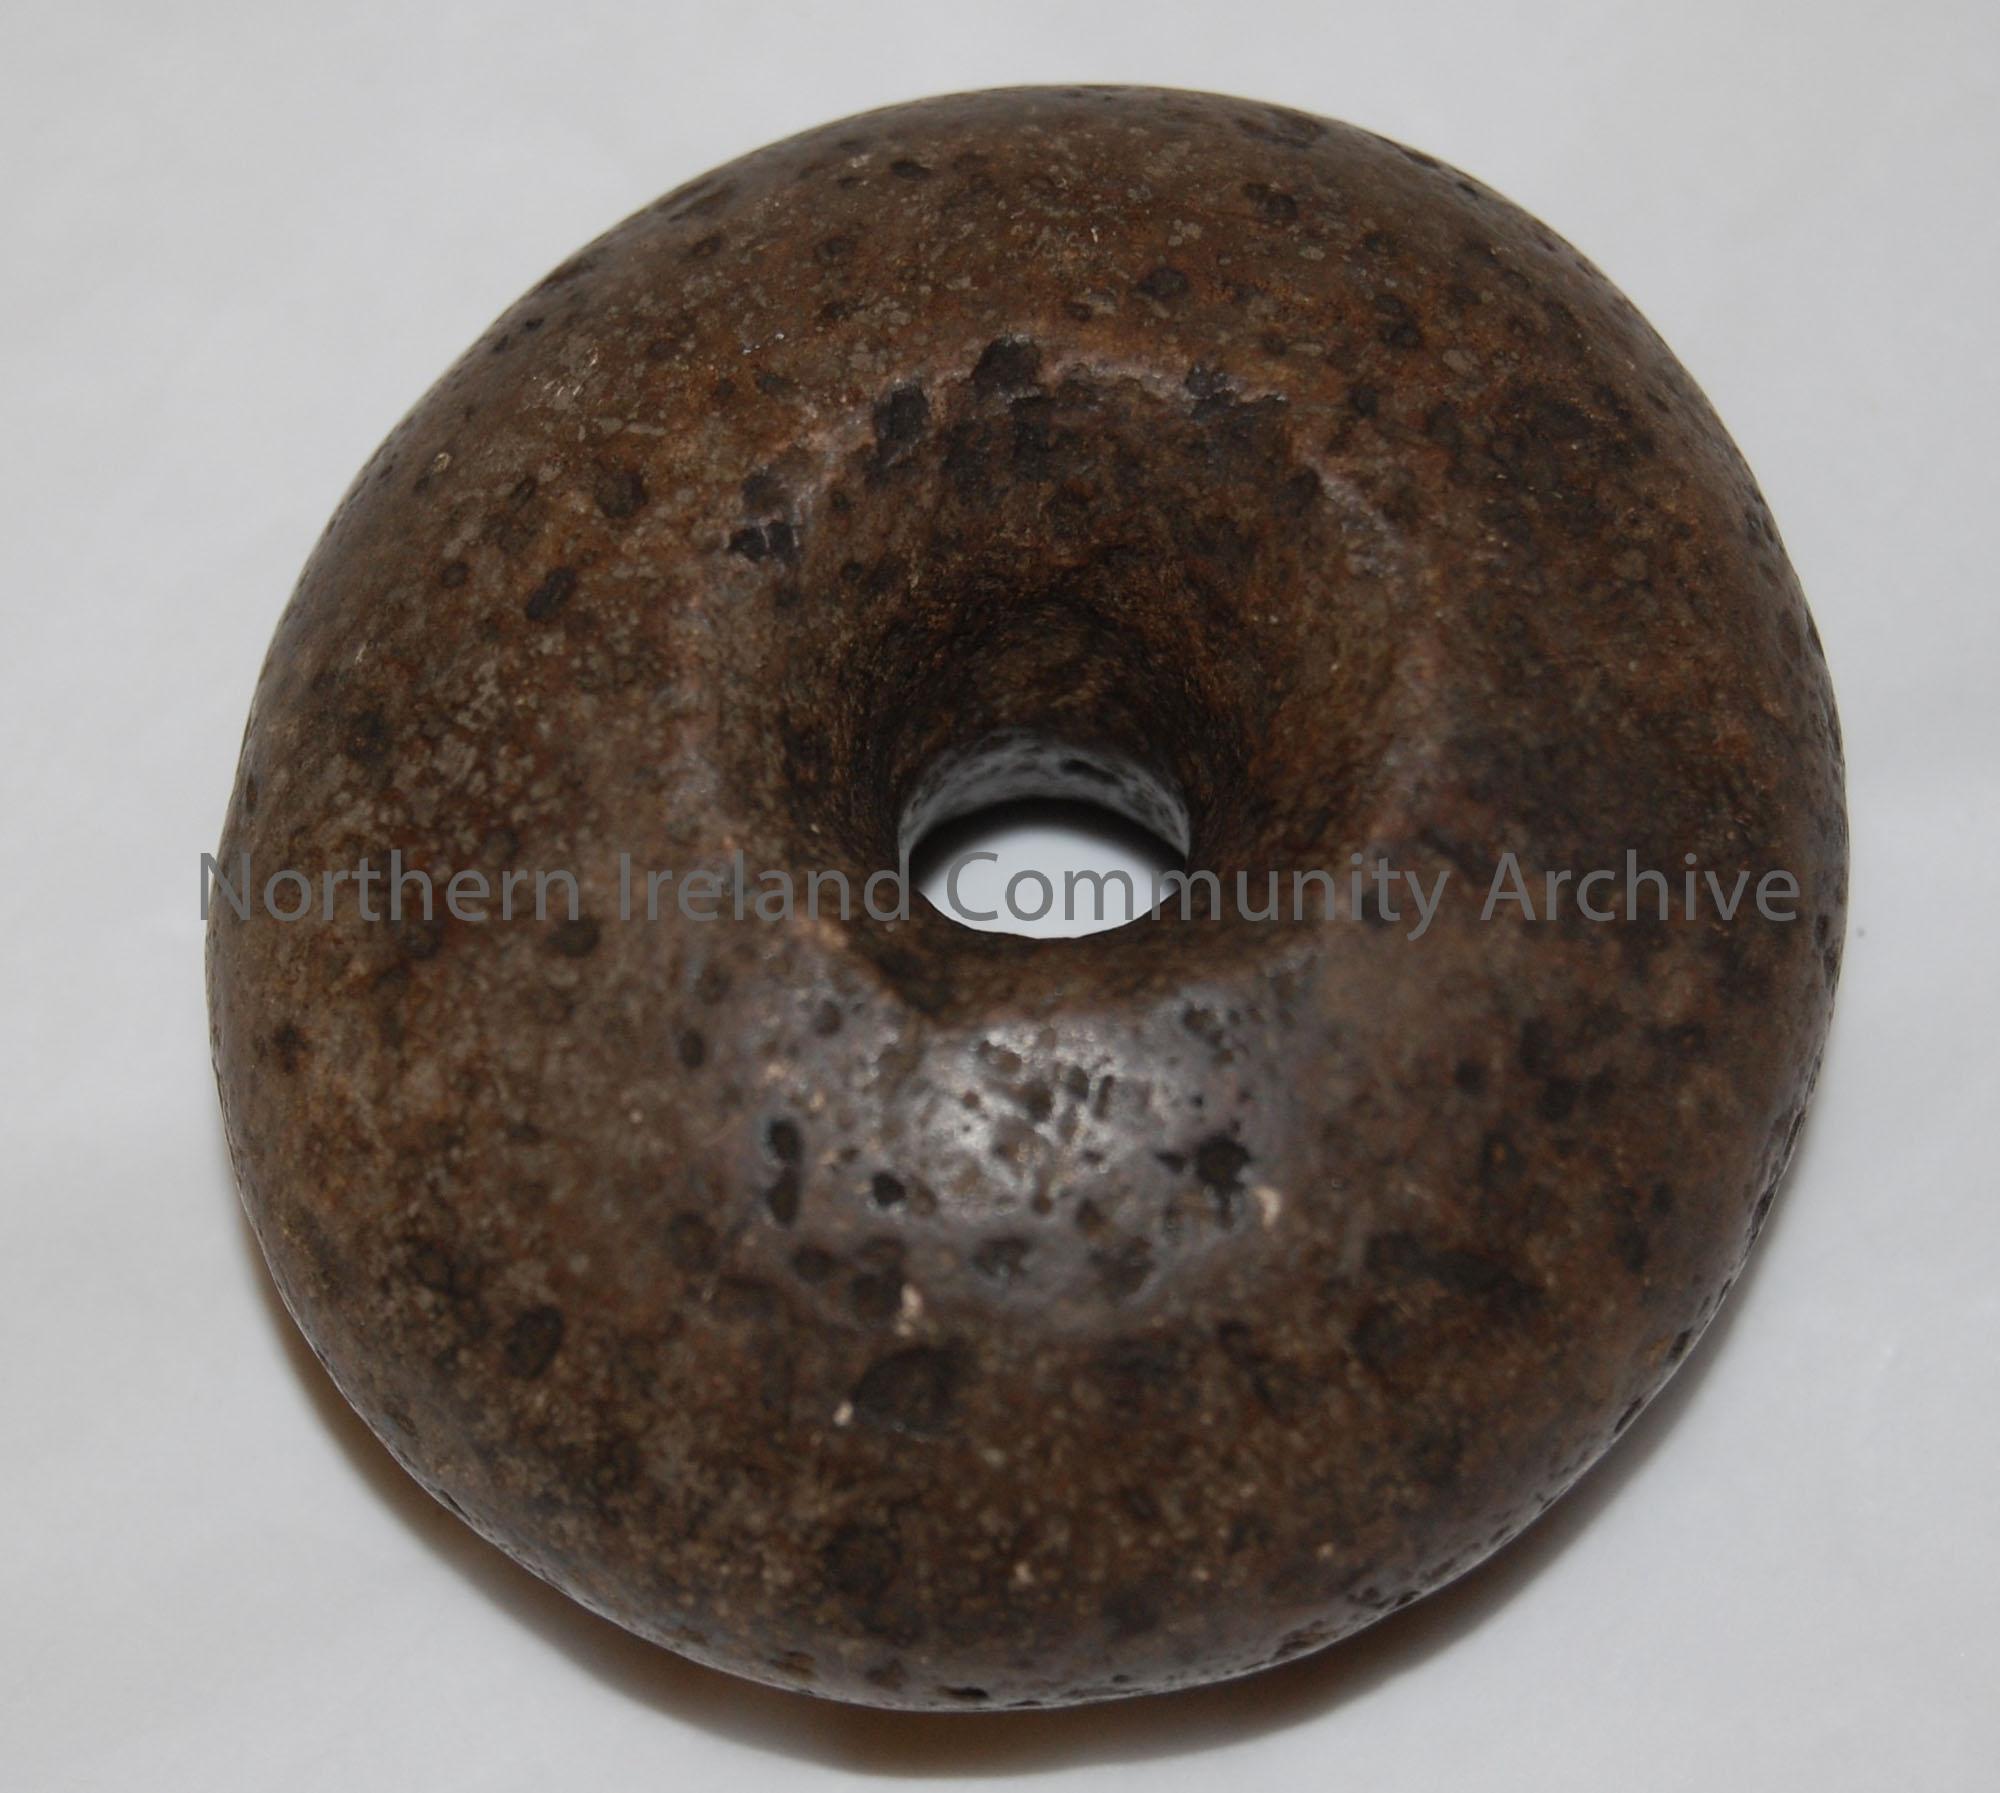 Neolithic mace head